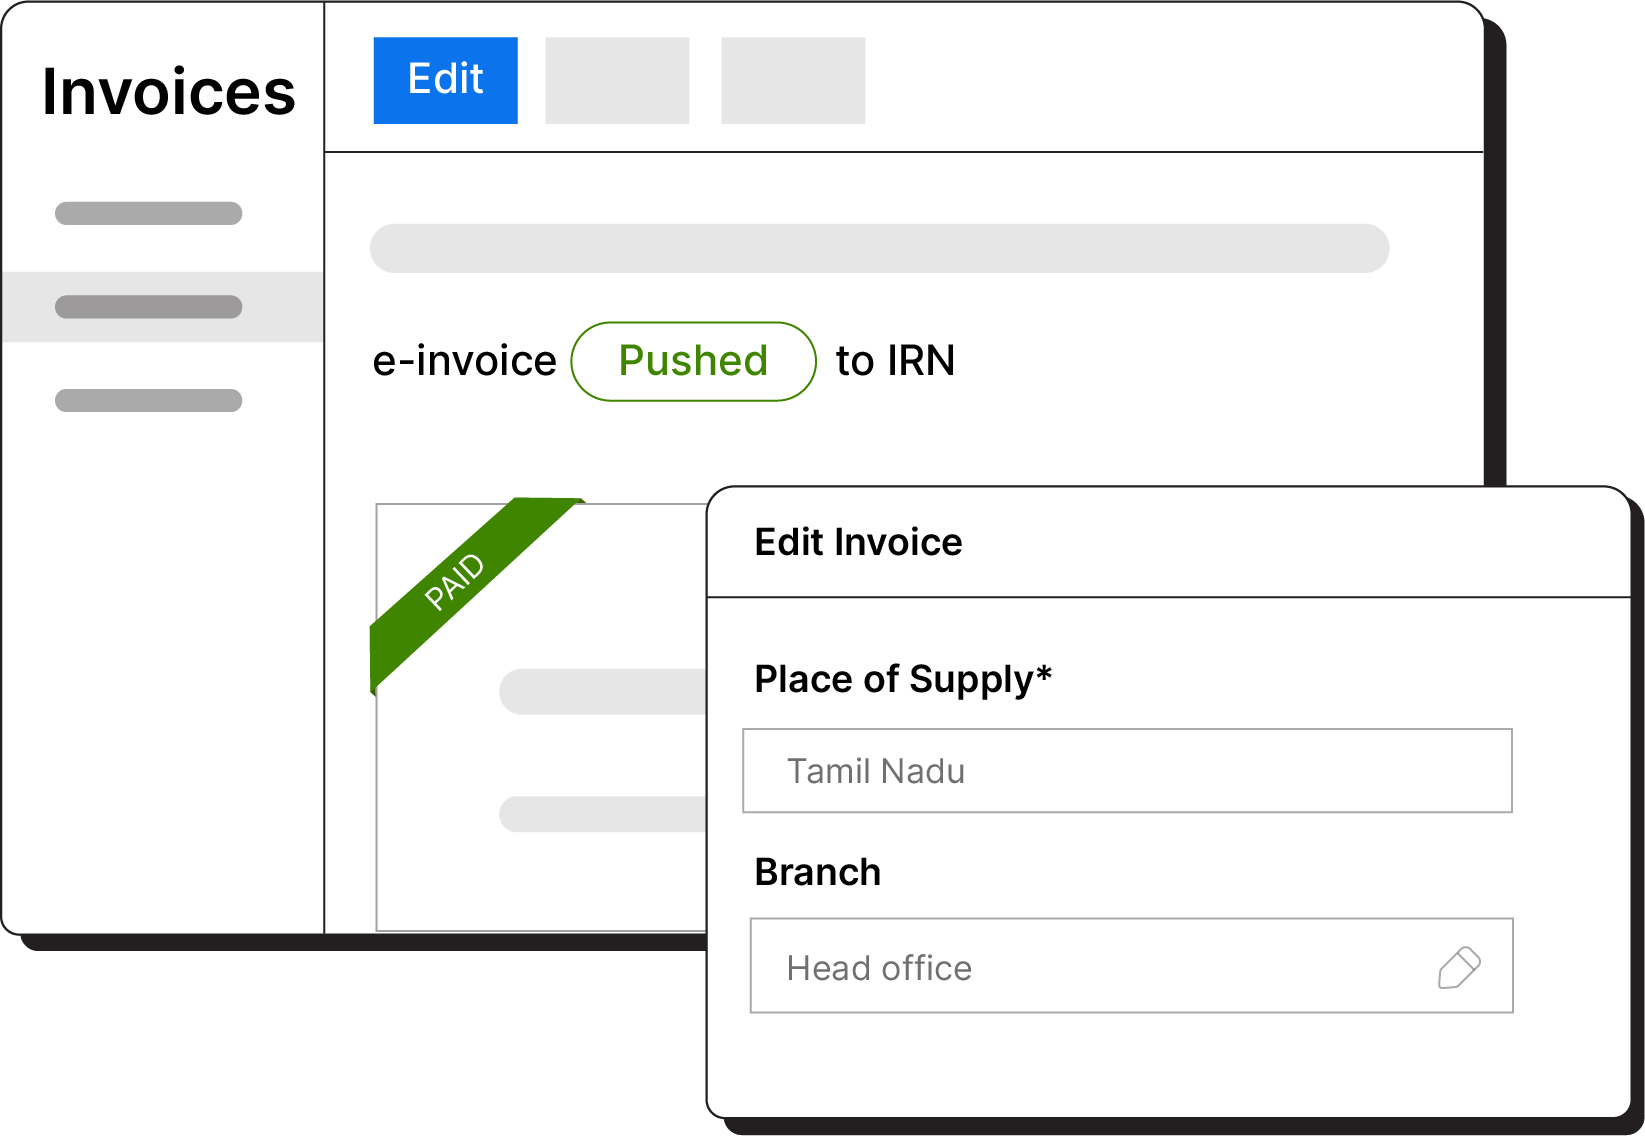 Edit e-invoices that are pushed to IRP - India edition